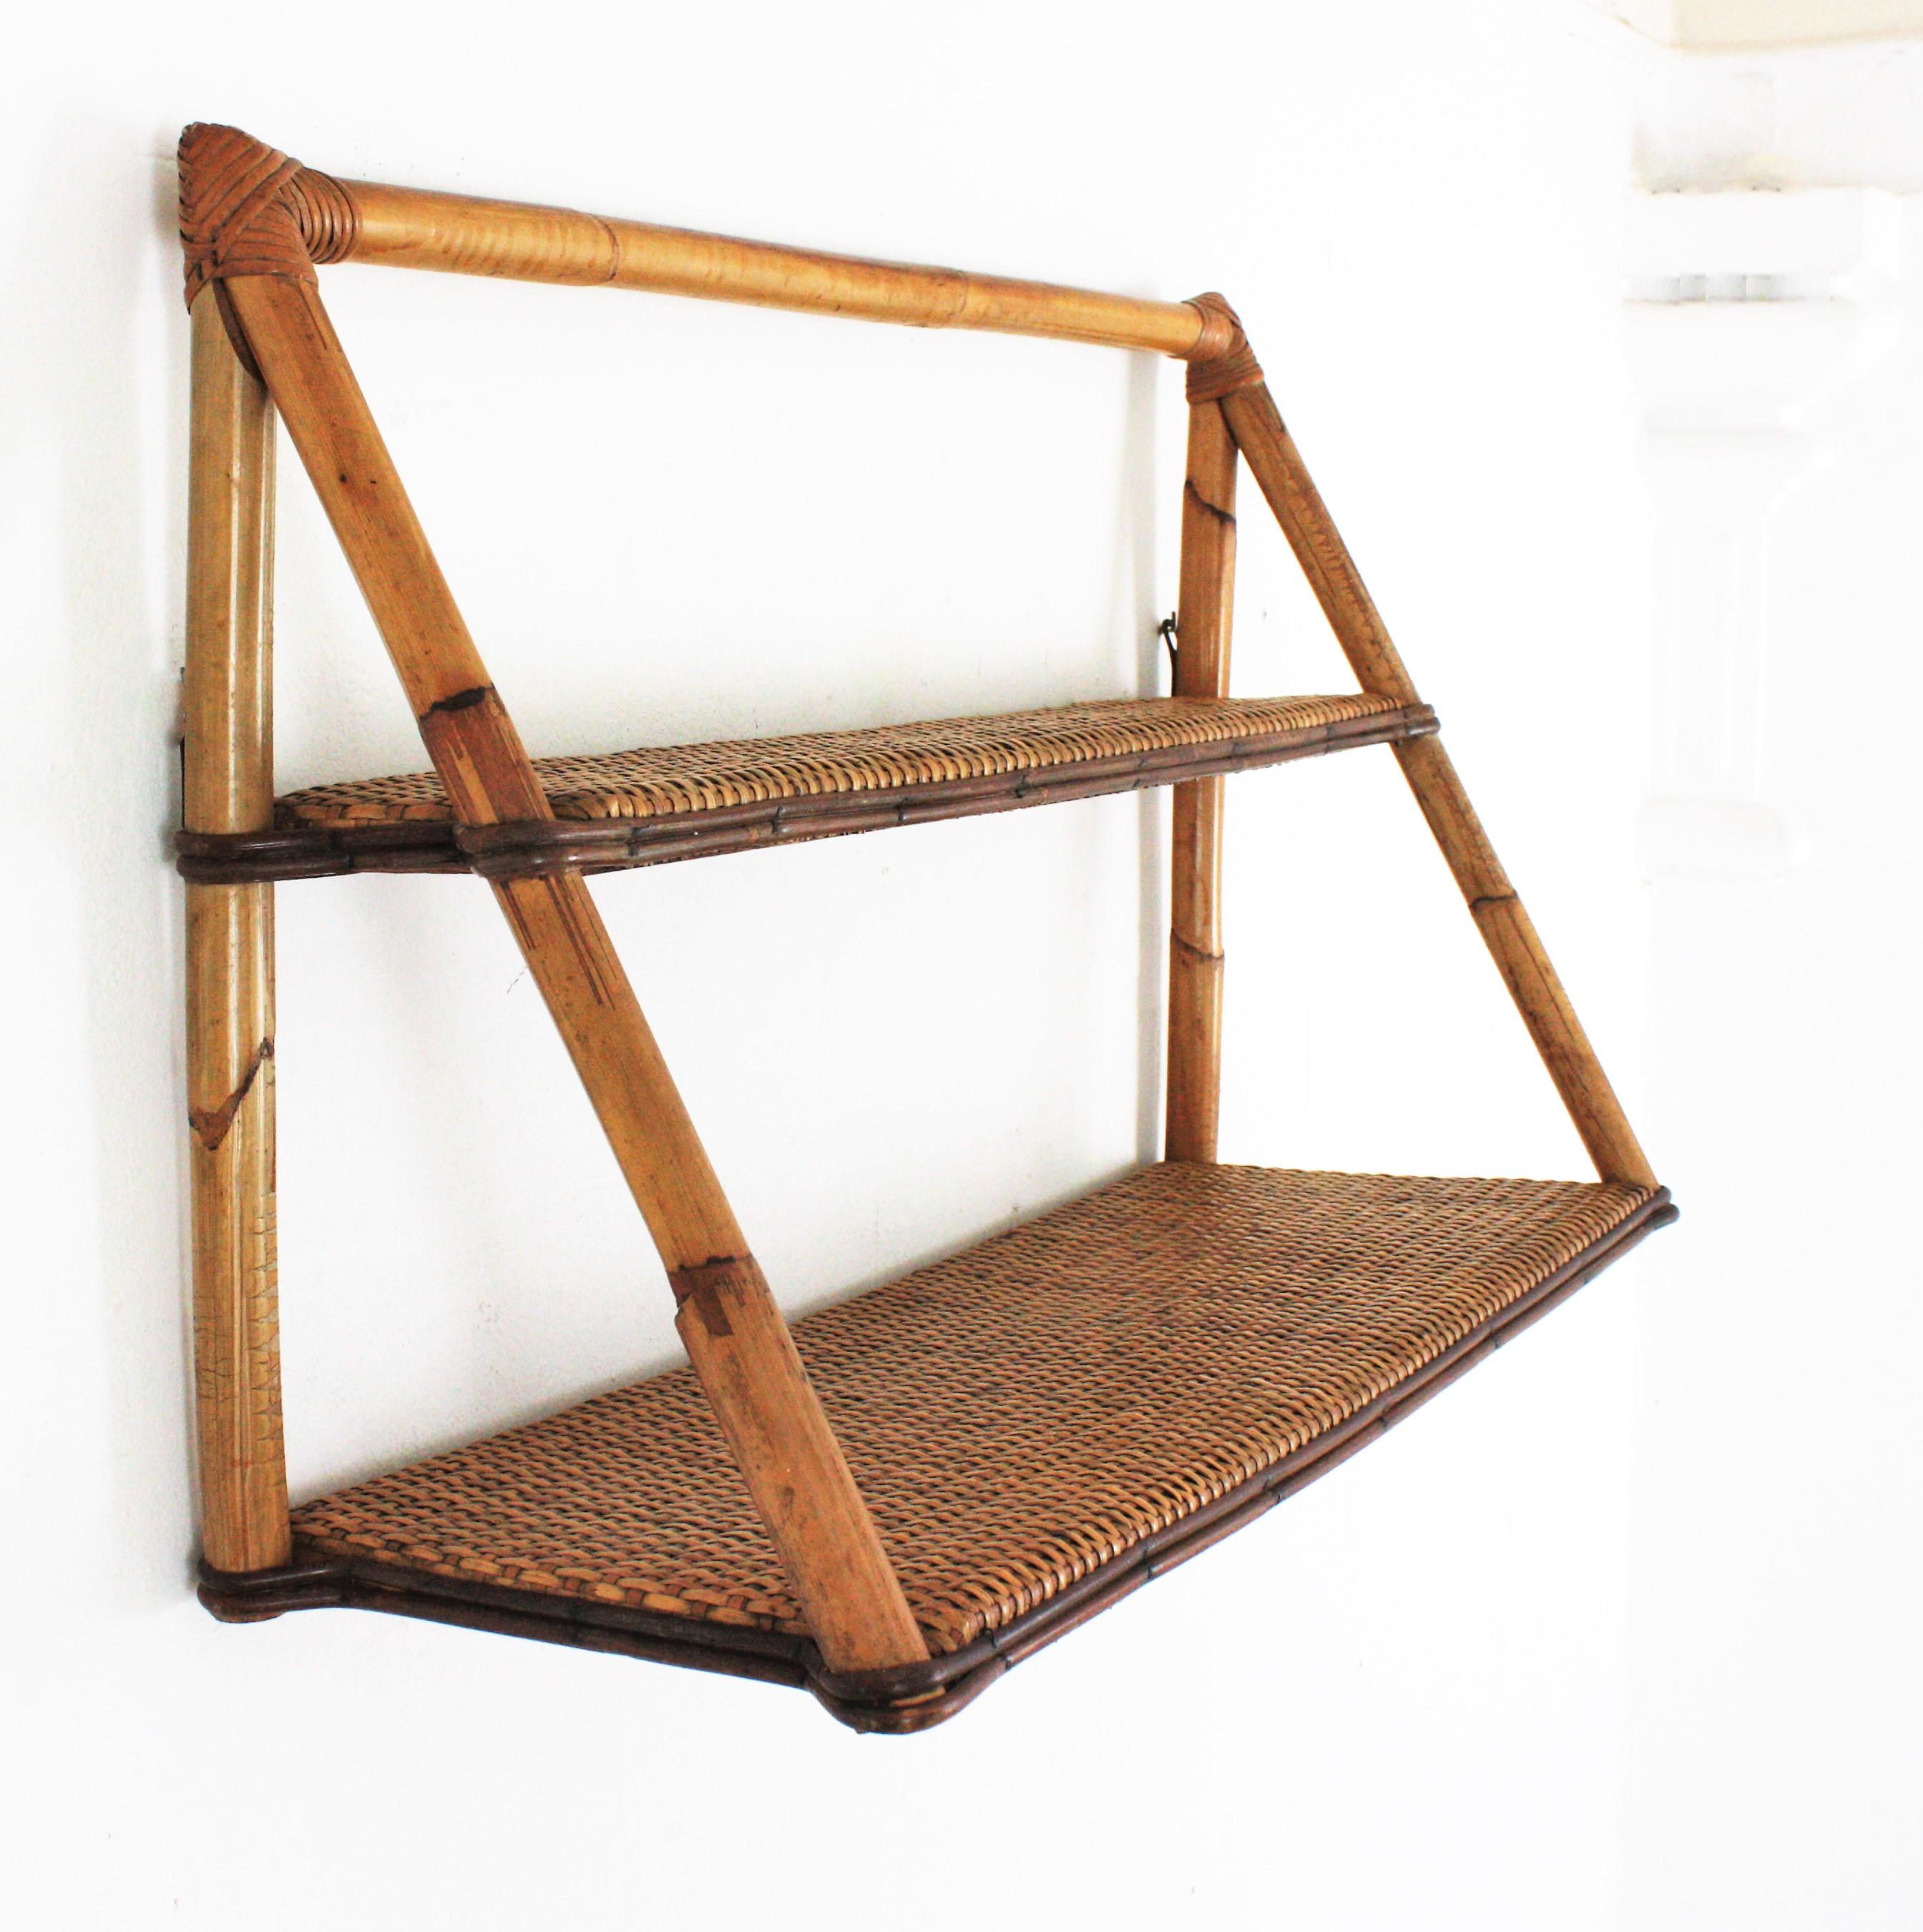 Hand-Crafted Bamboo Wicker Weave Wall Shelf, 1950s